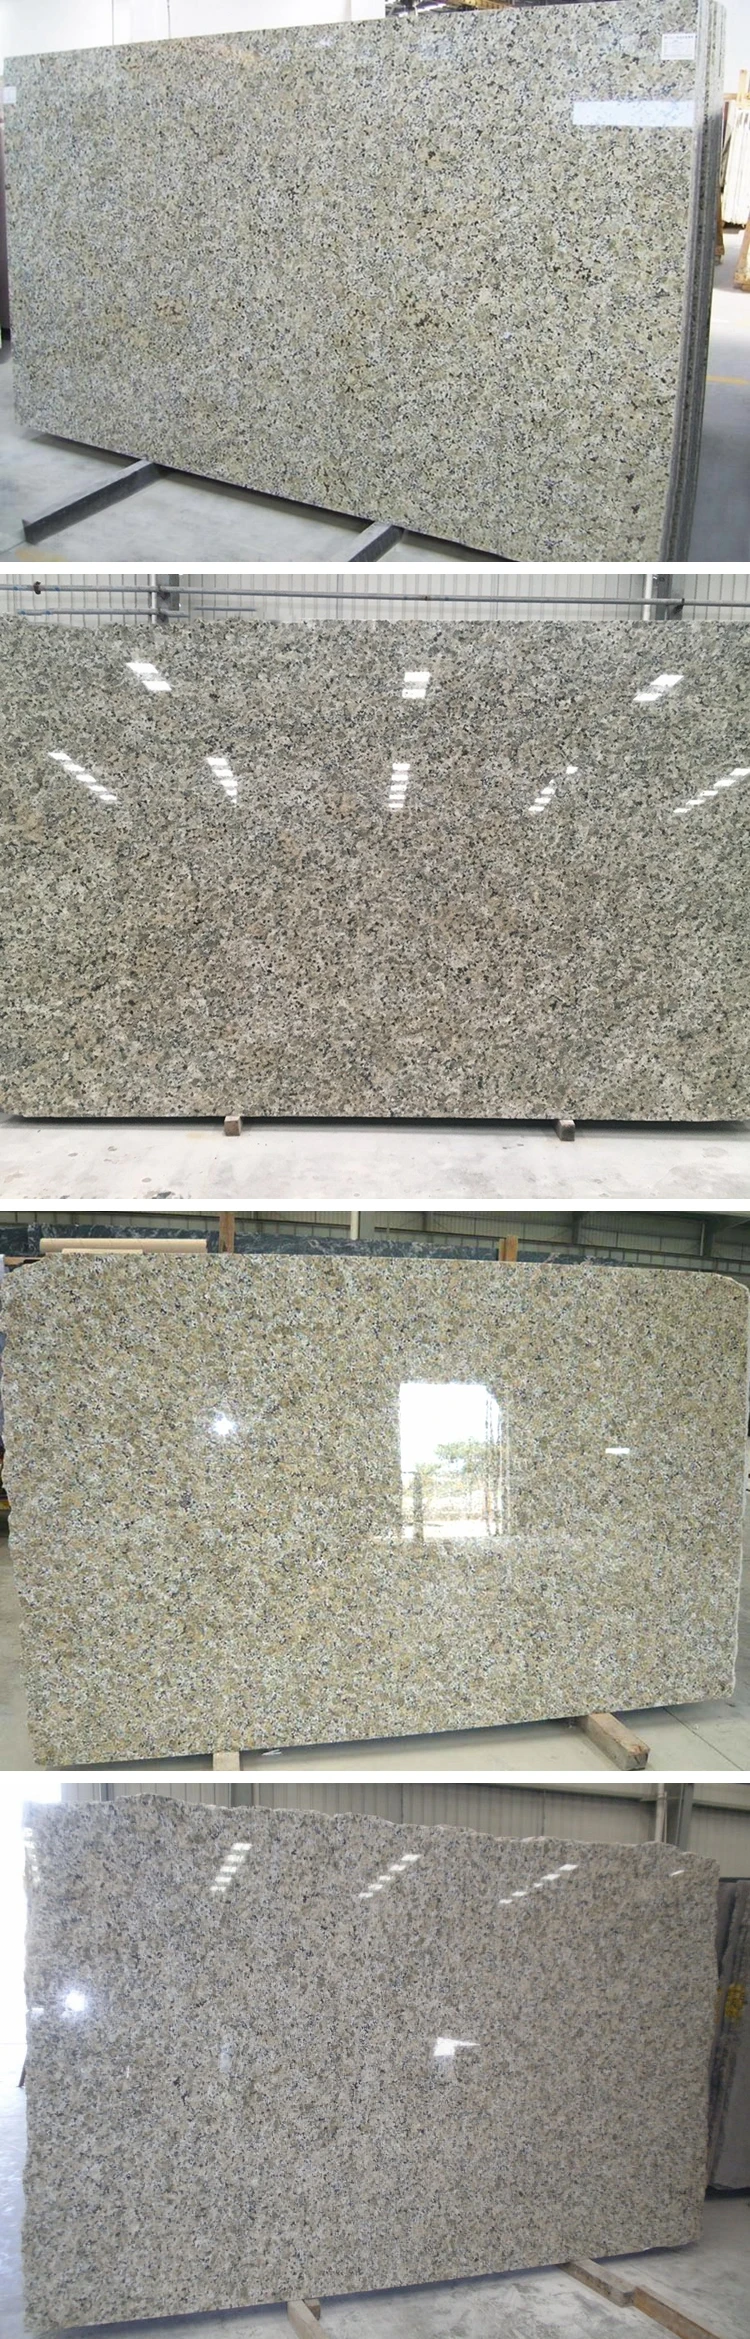 Crystal Yellow Granite Polished Slab Countertop Tiles Thickness 600x600 Price In Philippines Buy Yellow Granite Granite Polished Slab Granite Tiles Price Product On Alibaba Com